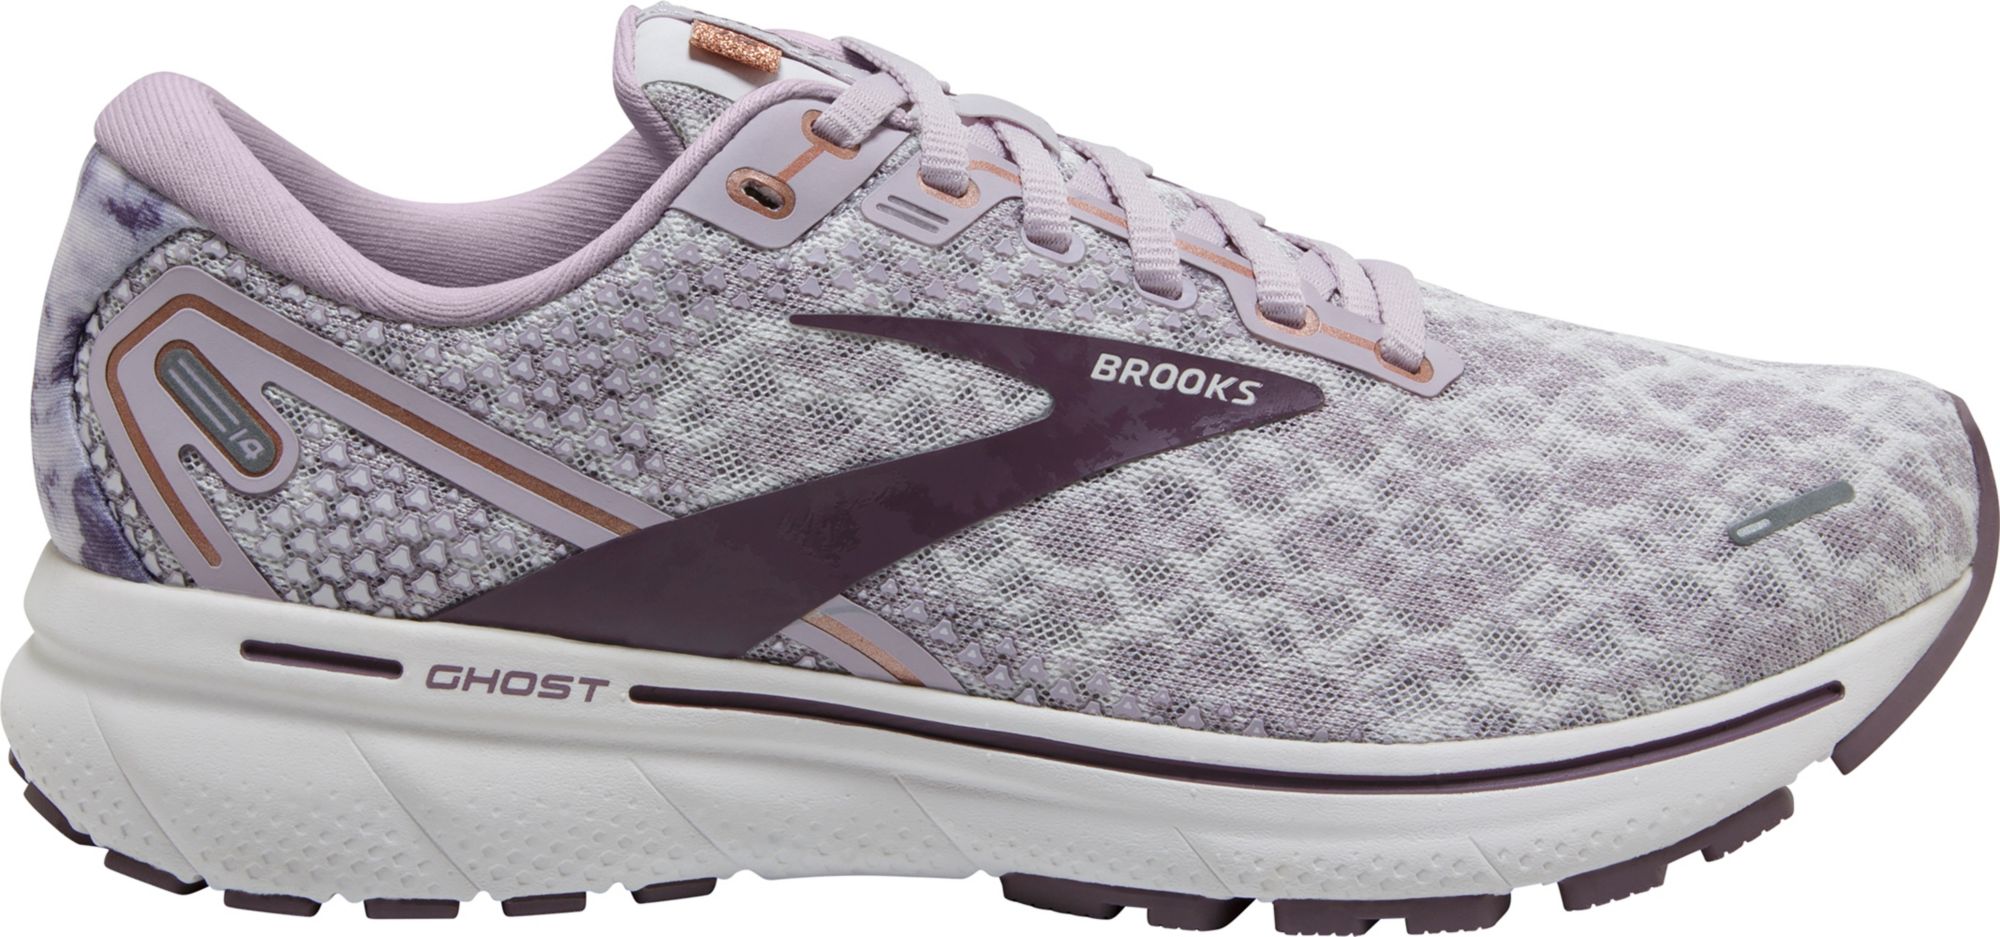 Brooks Women's Ghost 14 Running Shoes $98.95 + Free Shipping